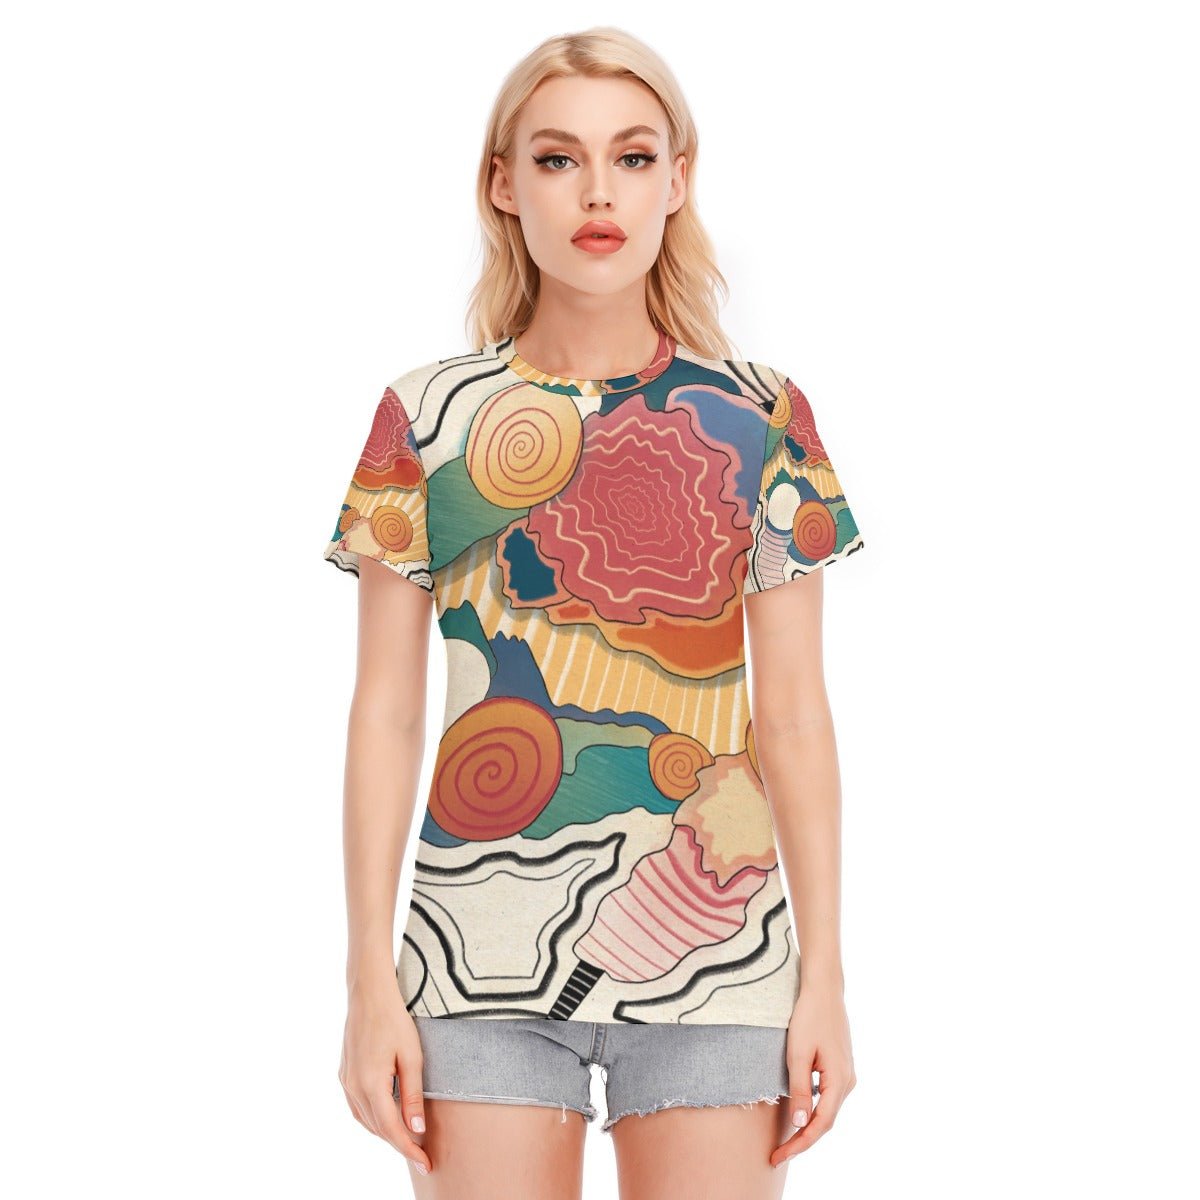 "Lost In Transition" - Women's T-Shirt | T-Shirts | All Around Artsy Fashion